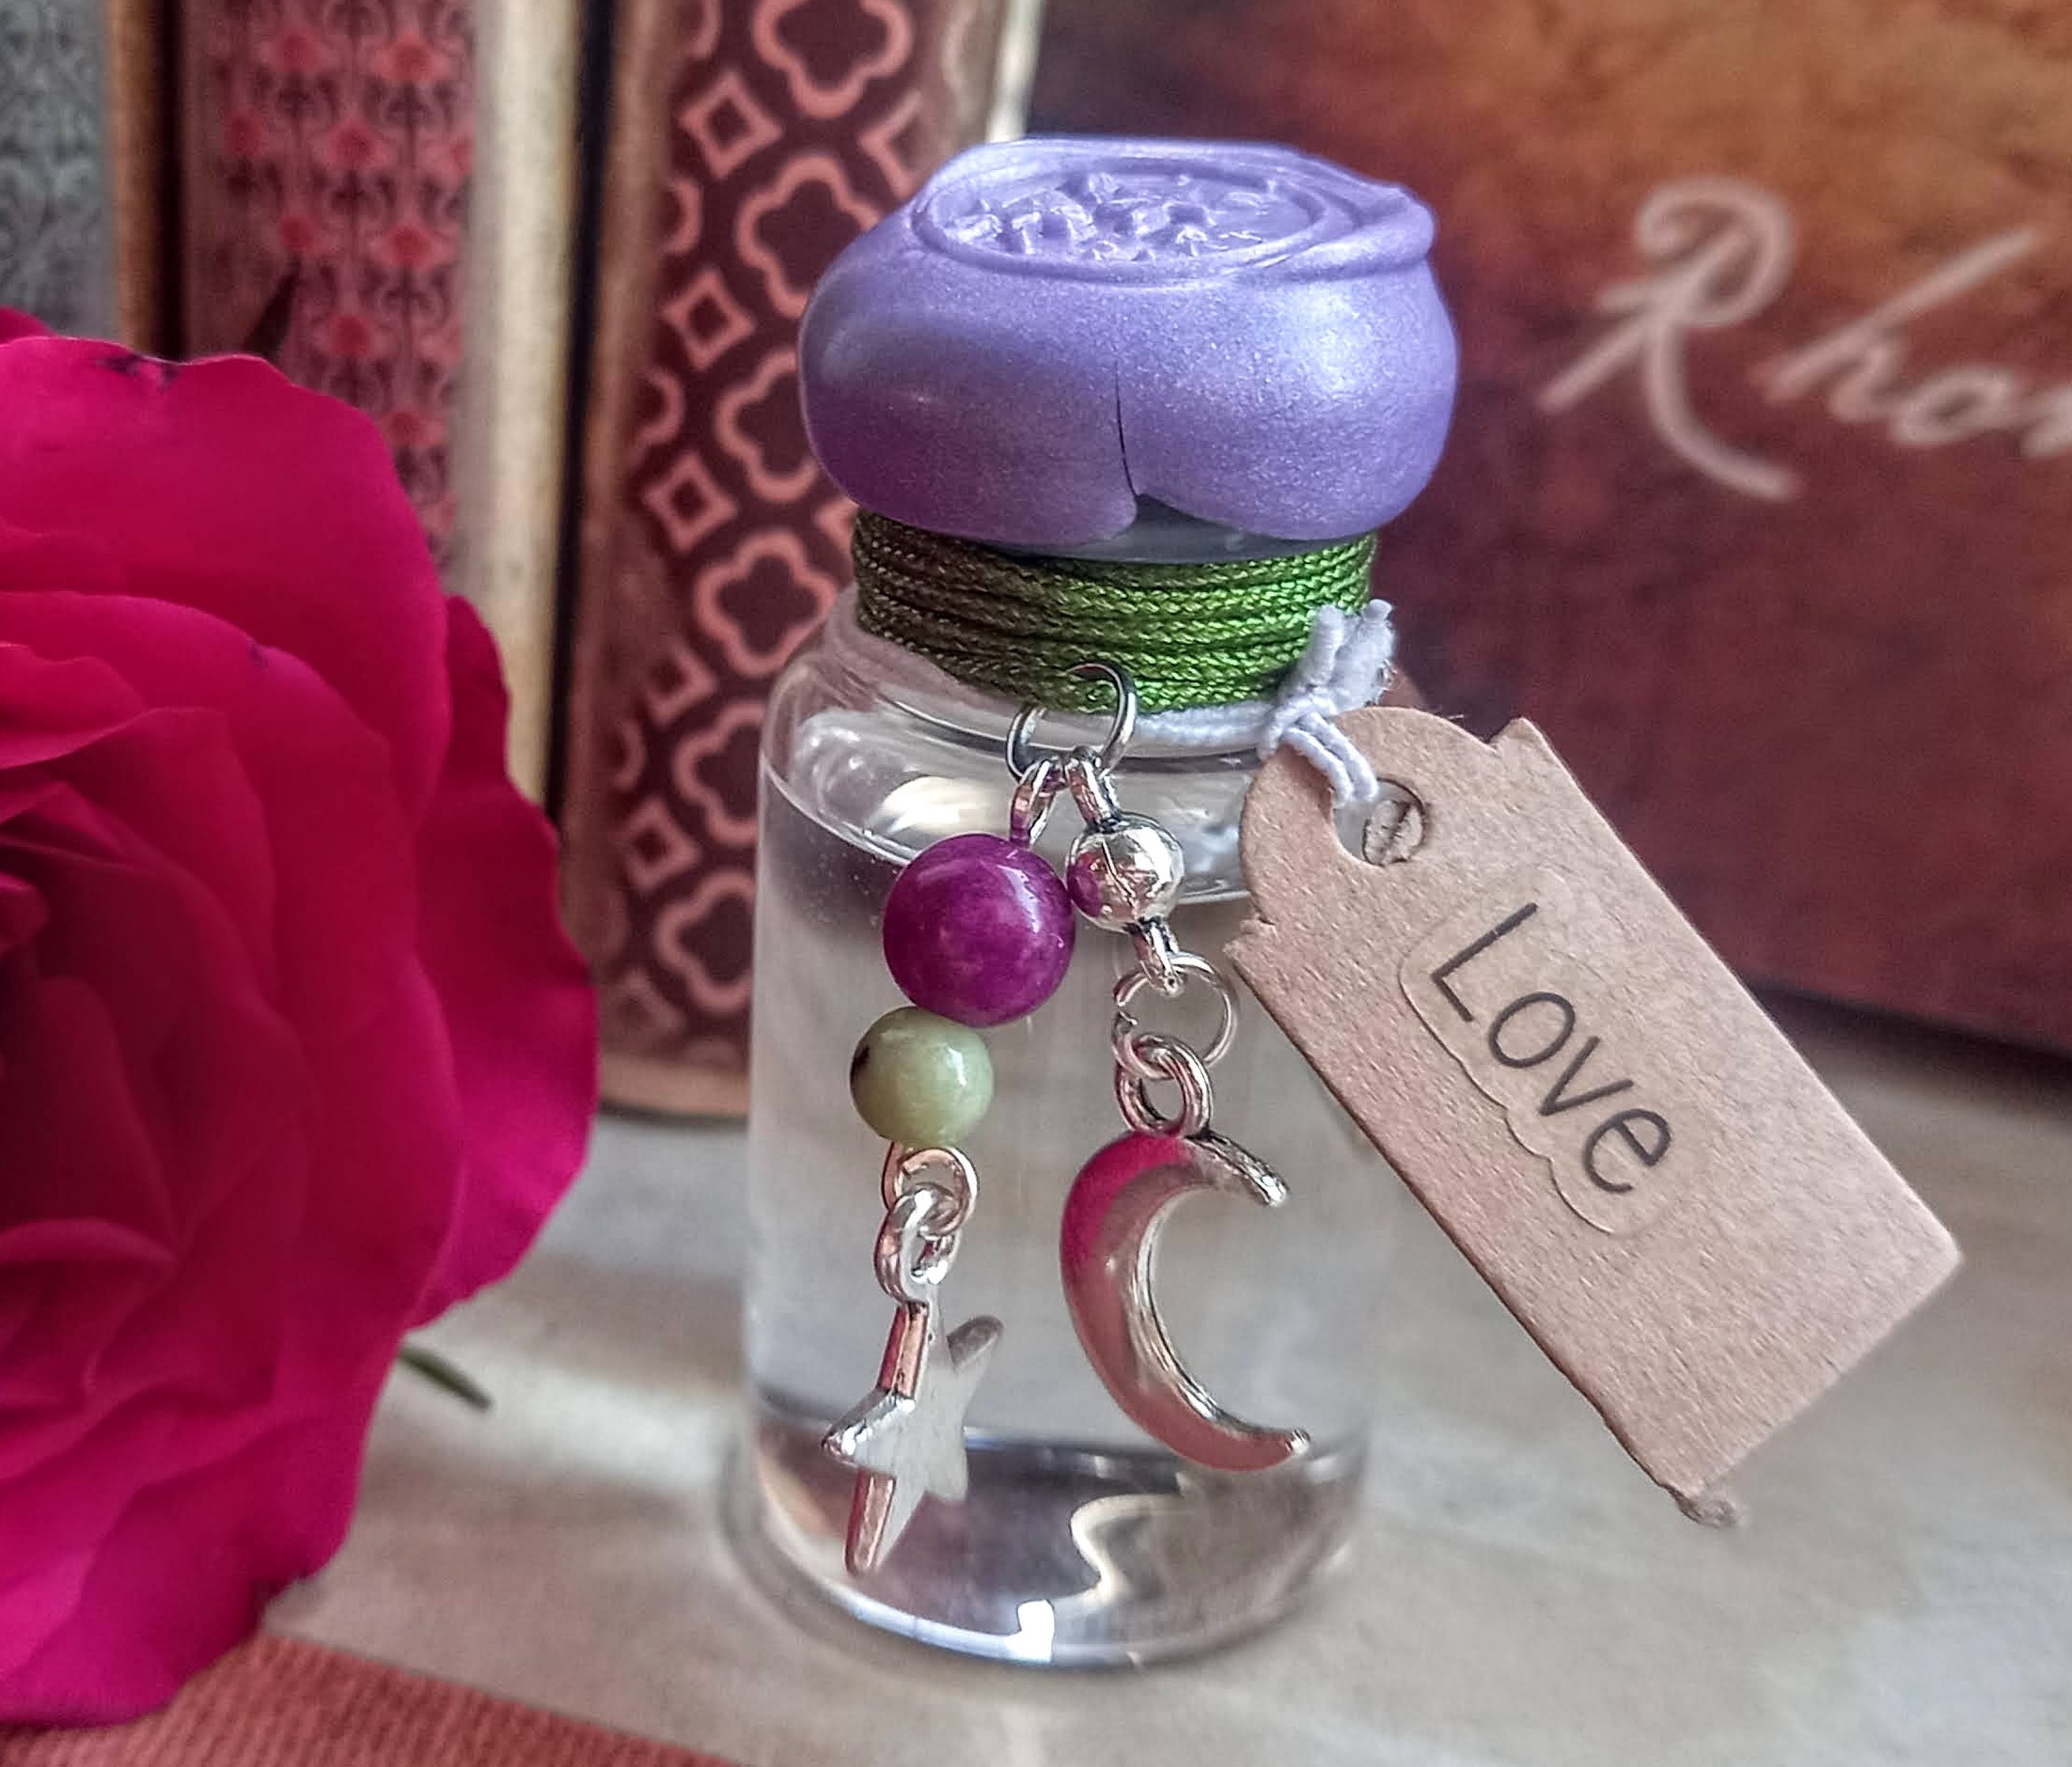 VIAL* Femininity and Intuition - Vial filled with St.Brigid Well Water from an Irish Holy Well.